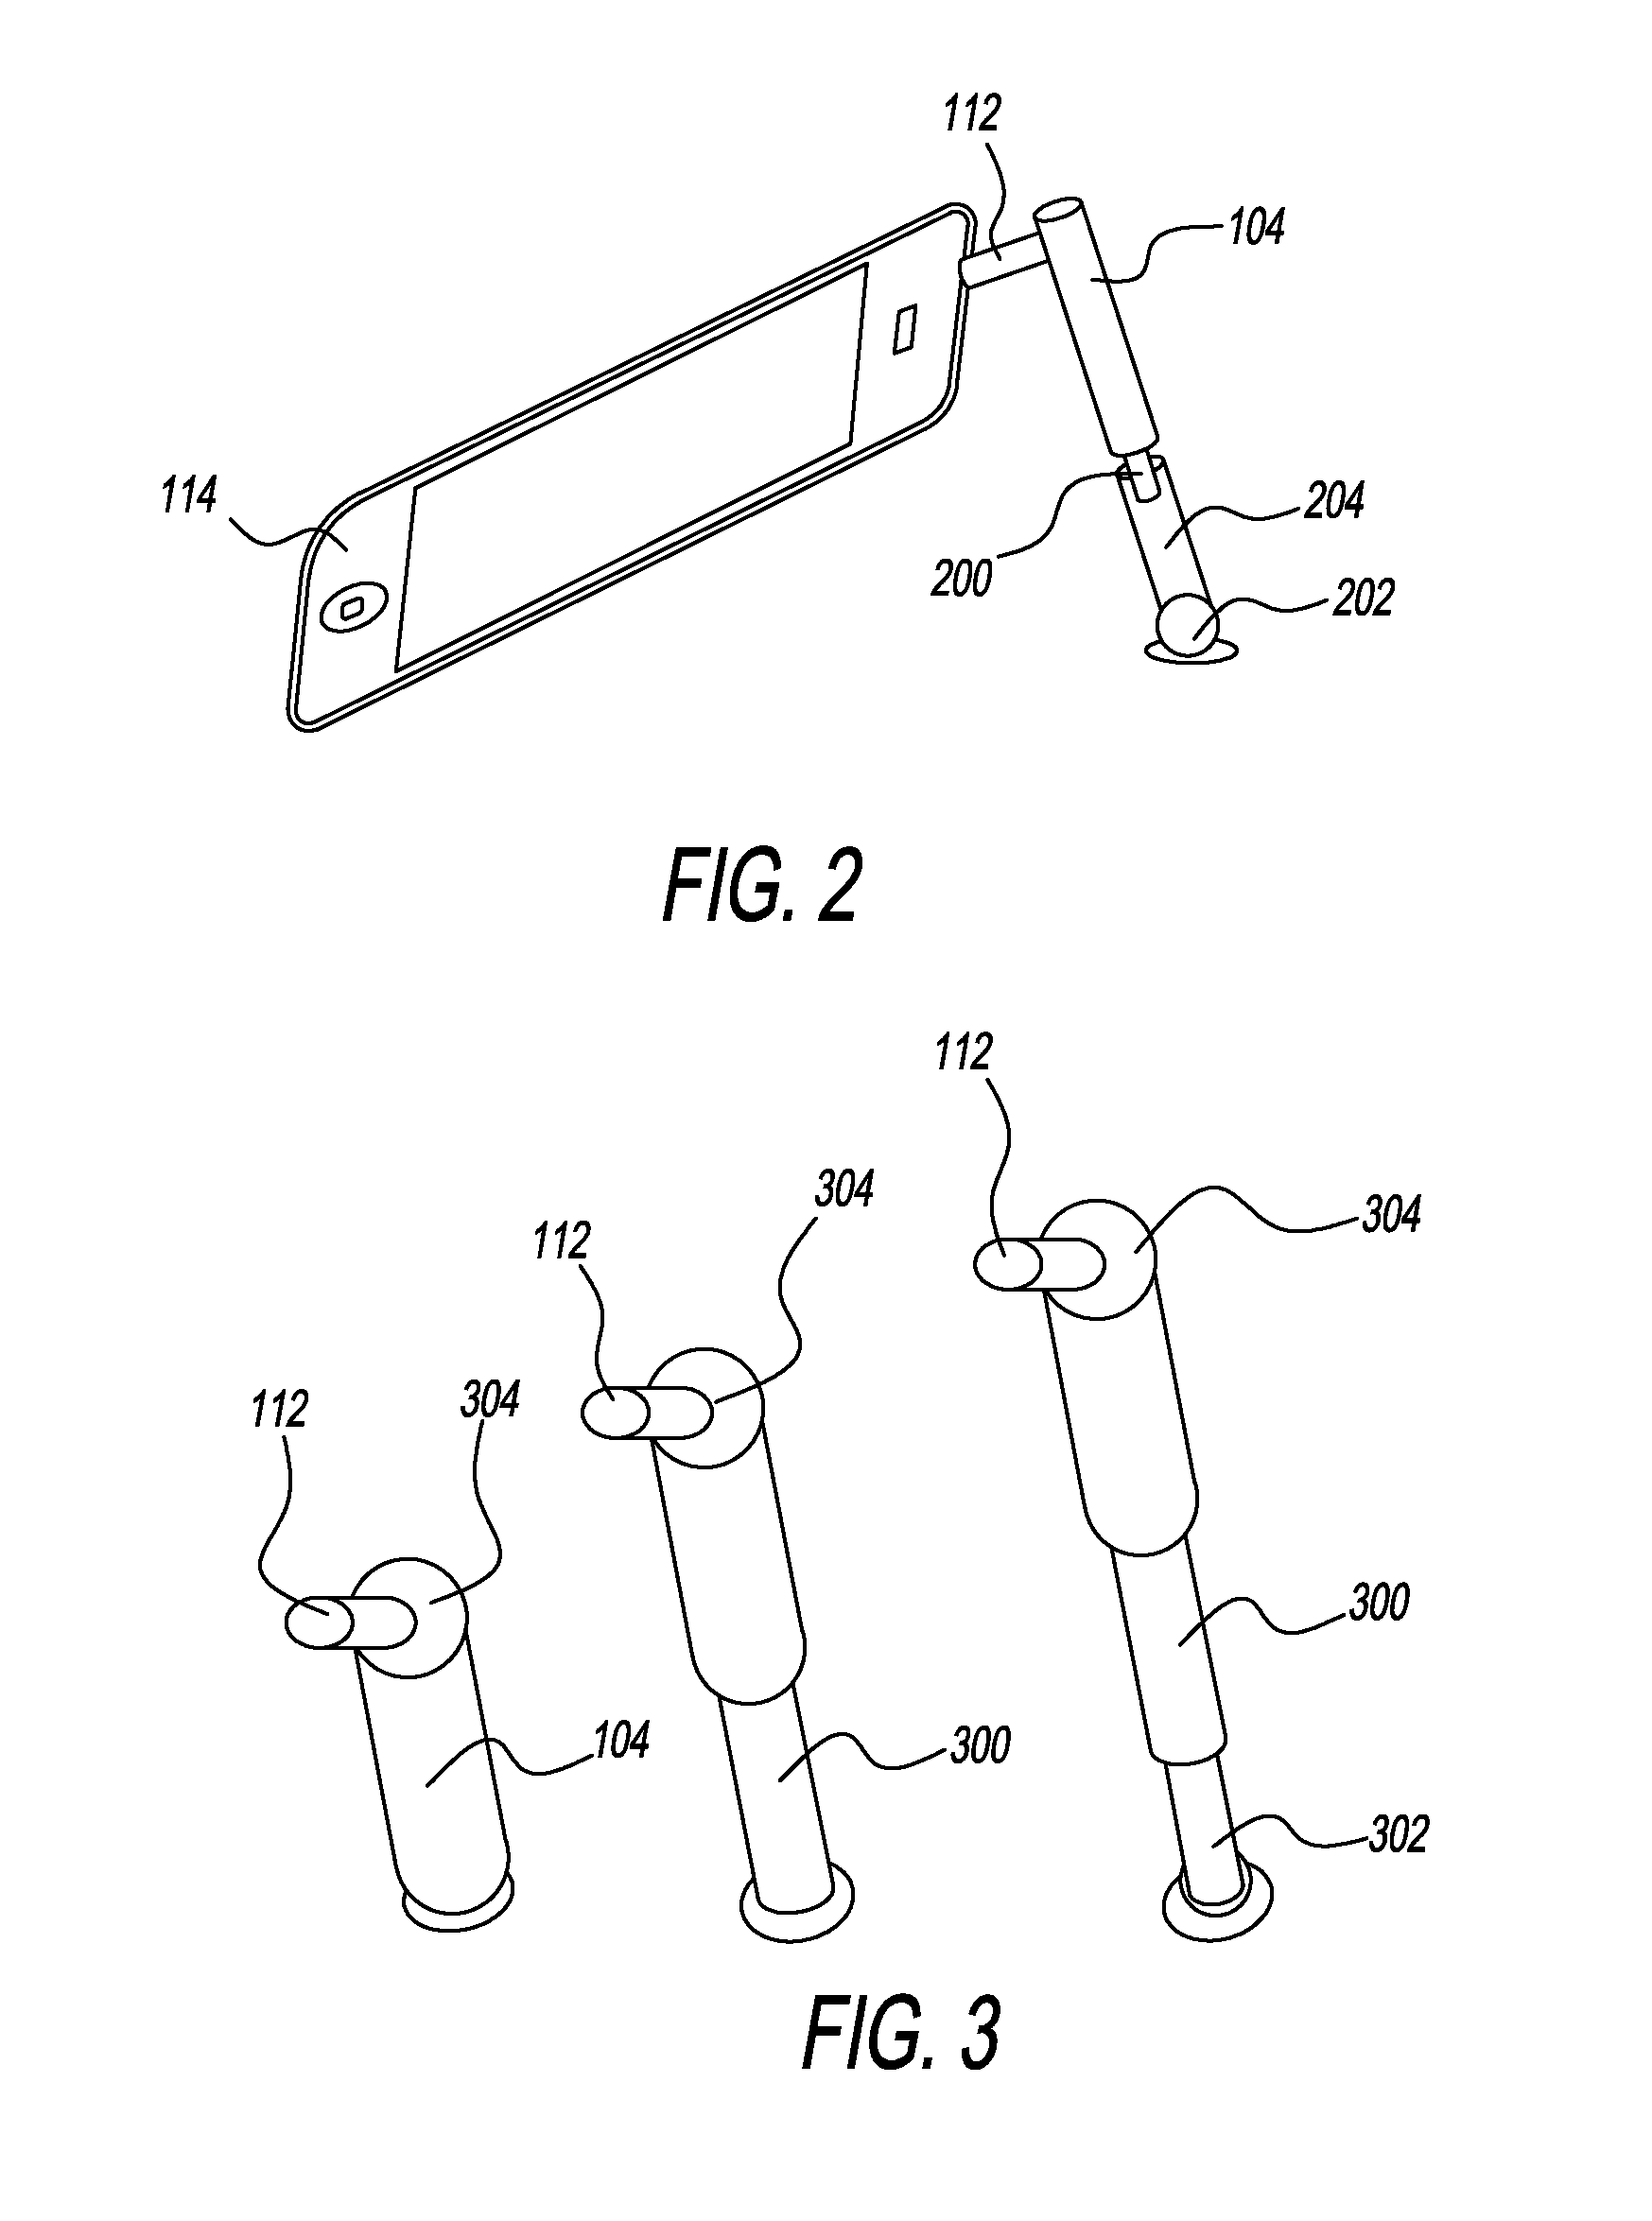 Device and related systems and methods for securing accessories to hand held electronic devices